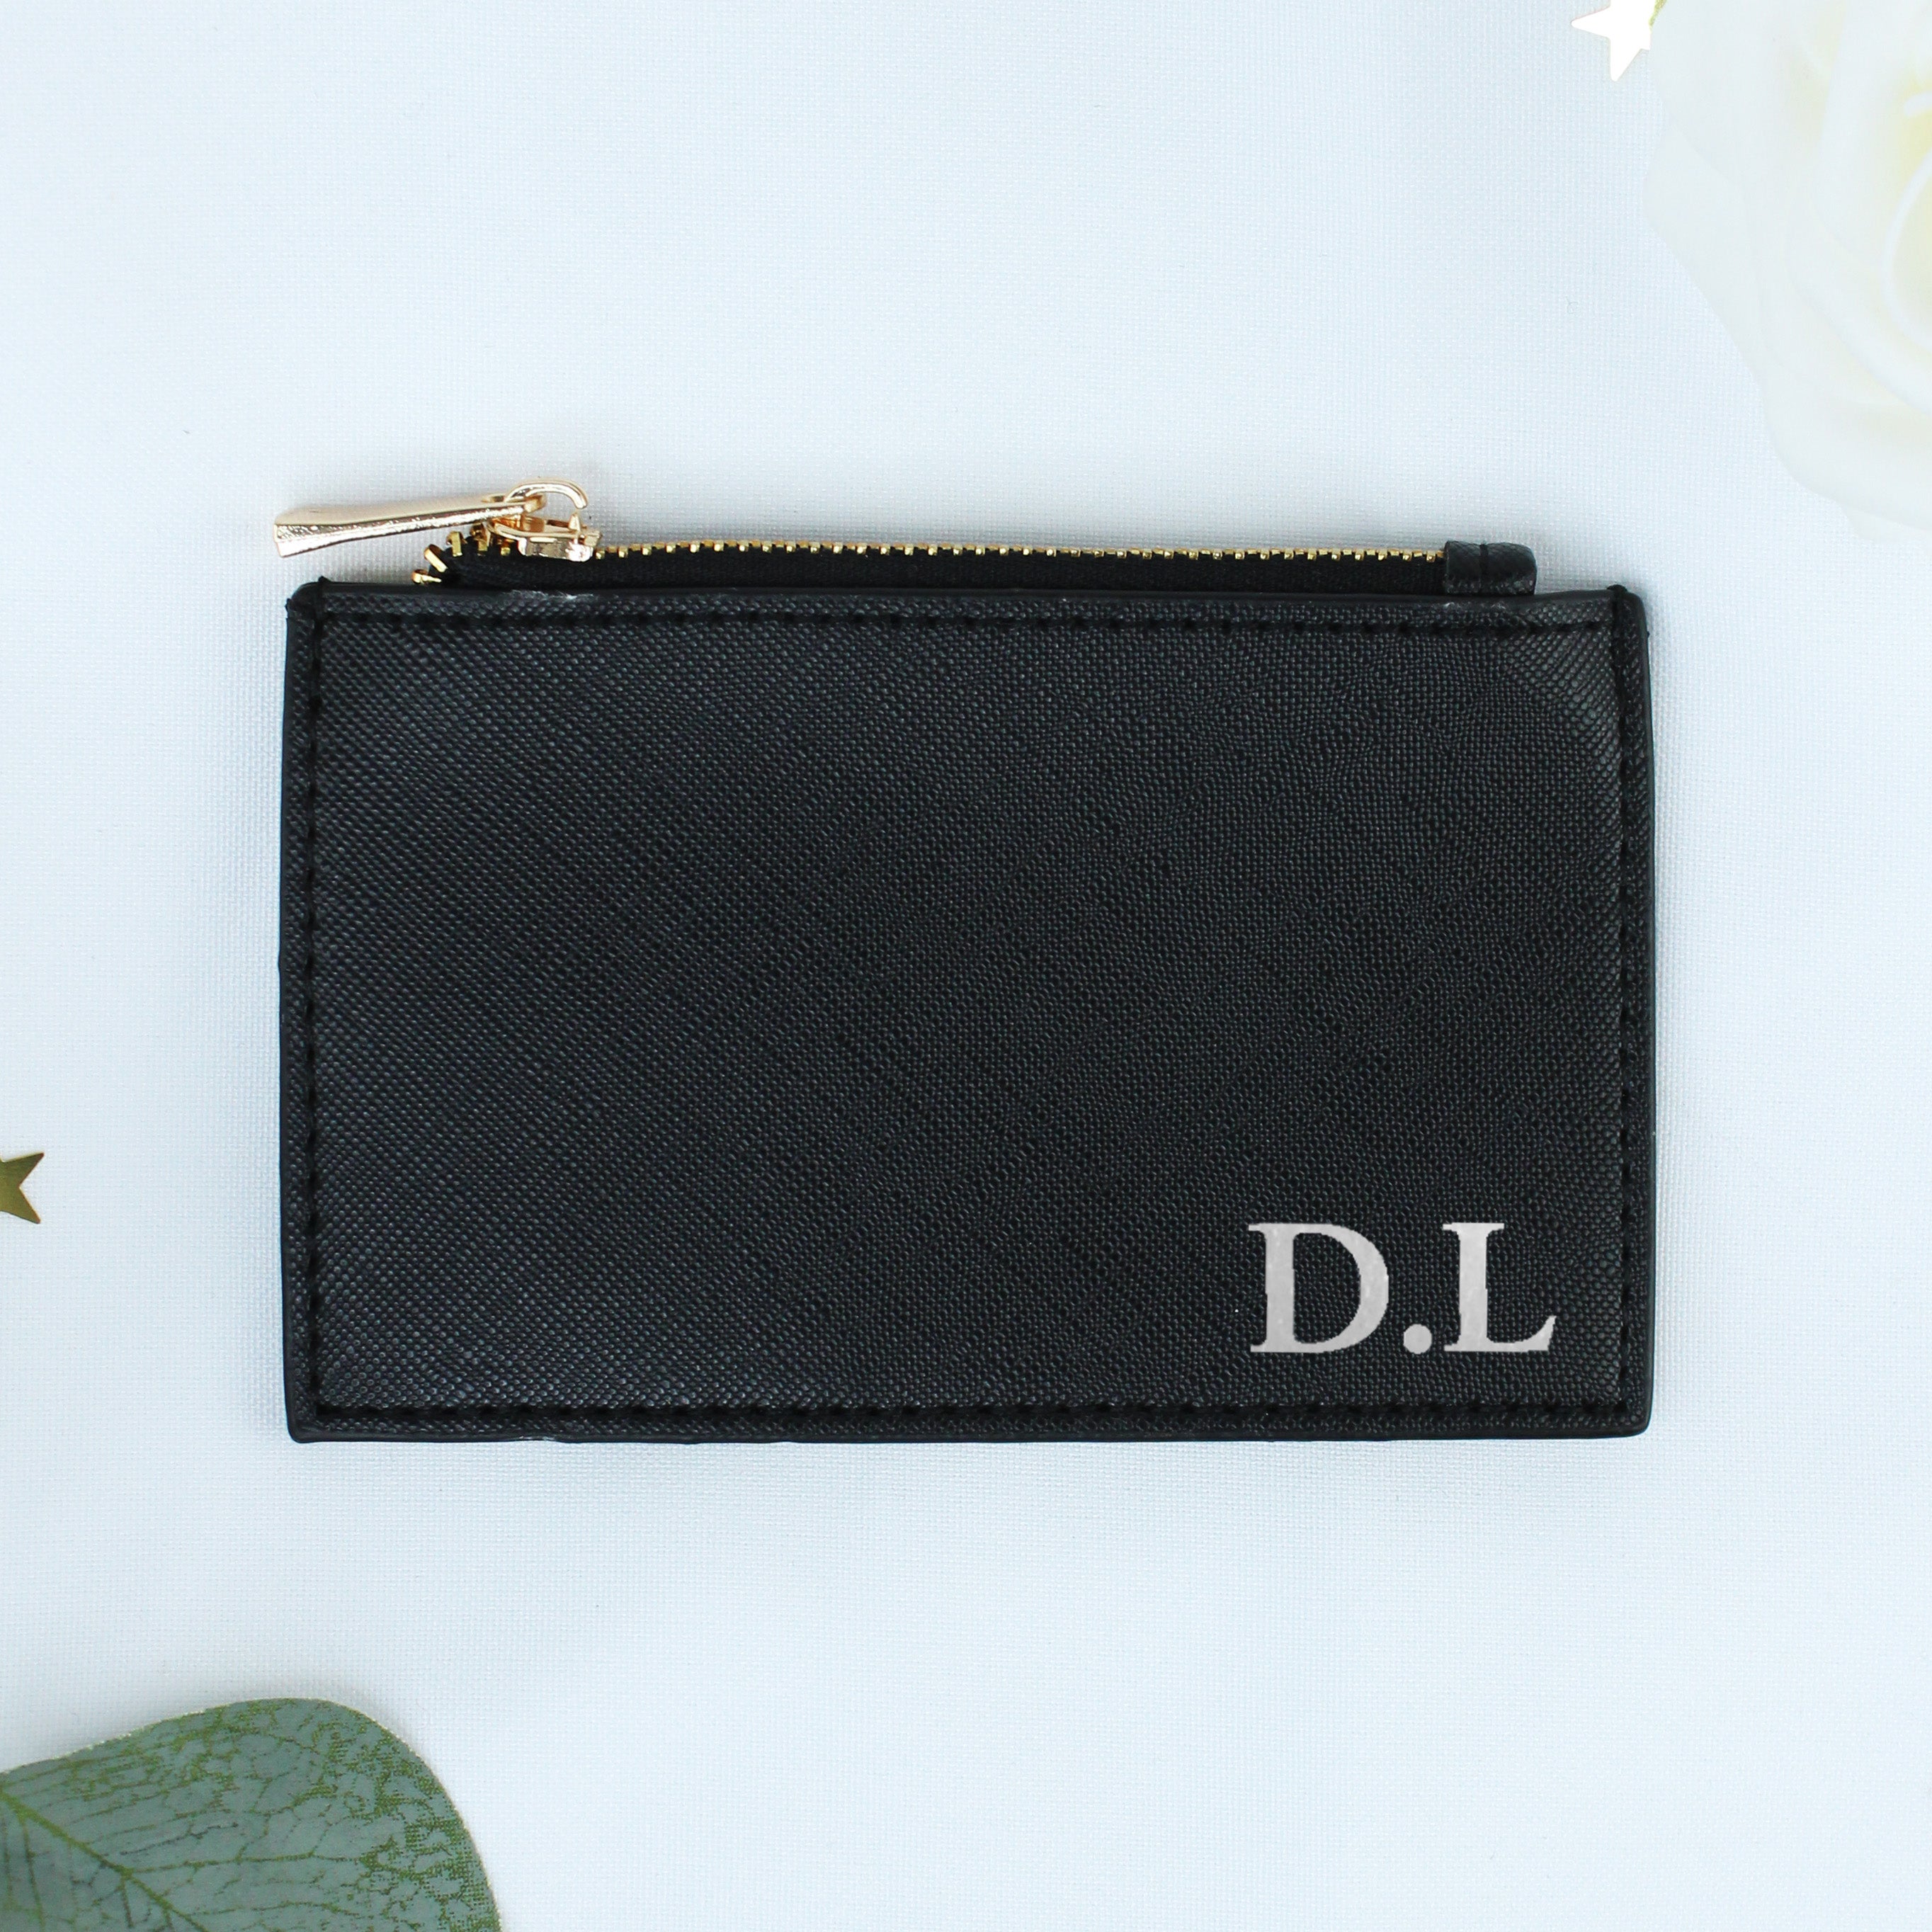 PERSONALISED CARD HOLDER Coin Purse Initial Card Holder - Etsy UK | Personalized  purse, Coin purse, Monogram card